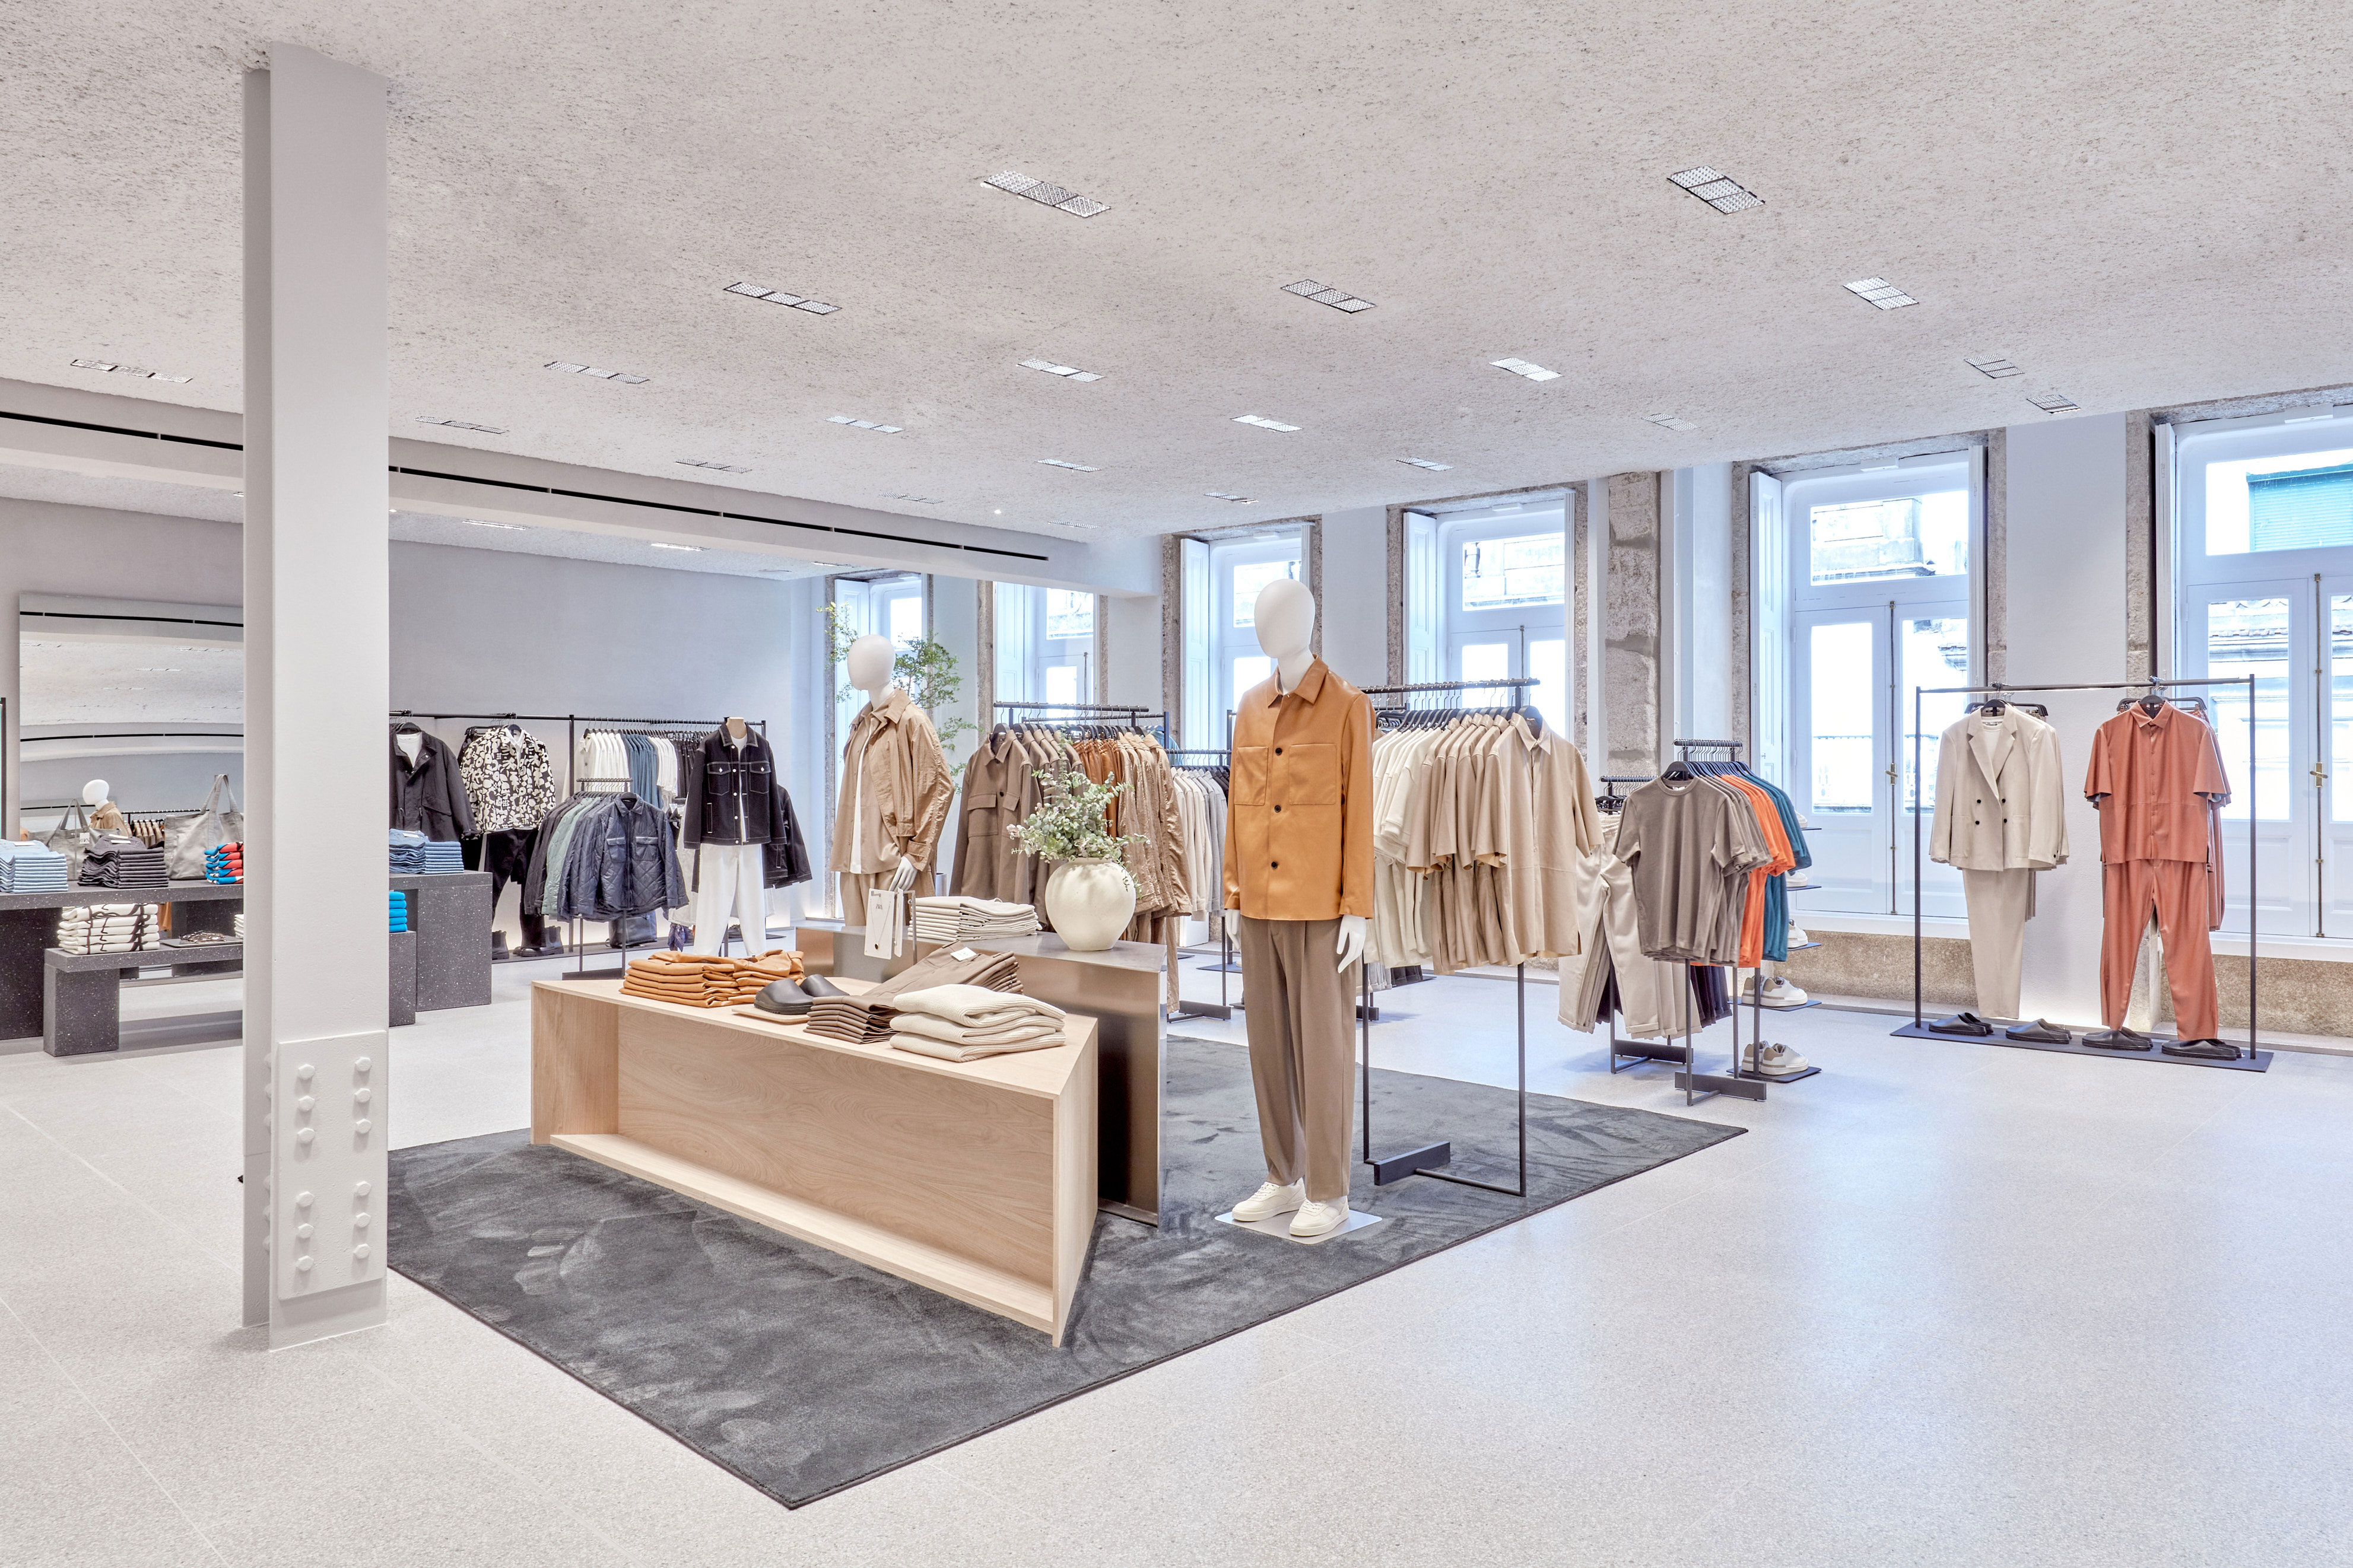 Portugal's first Zara reopens after extensive expansion and remodeling.